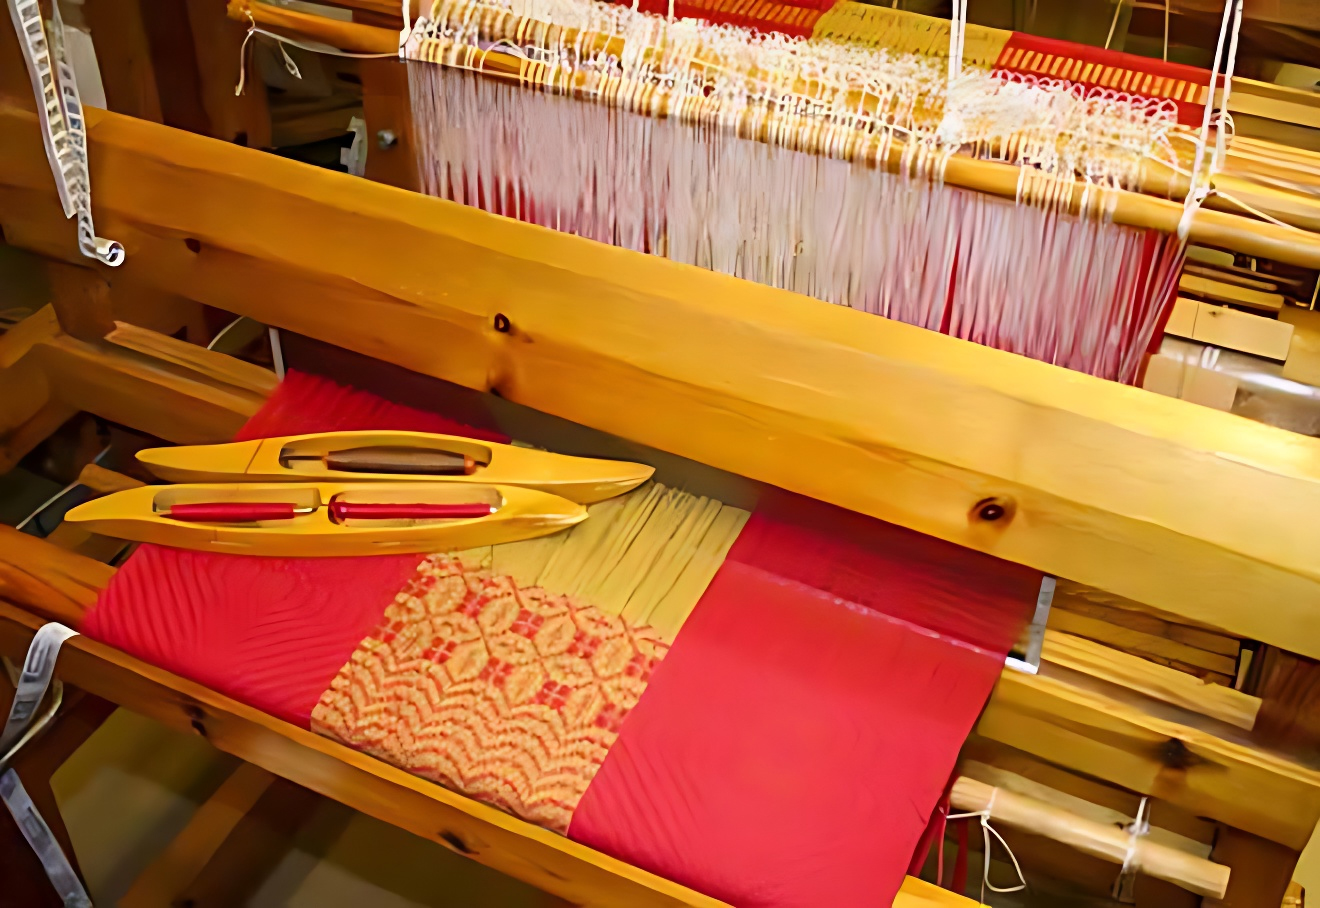 Nagaland Handloom Expo To be Held Across State Beginning From Oct 9